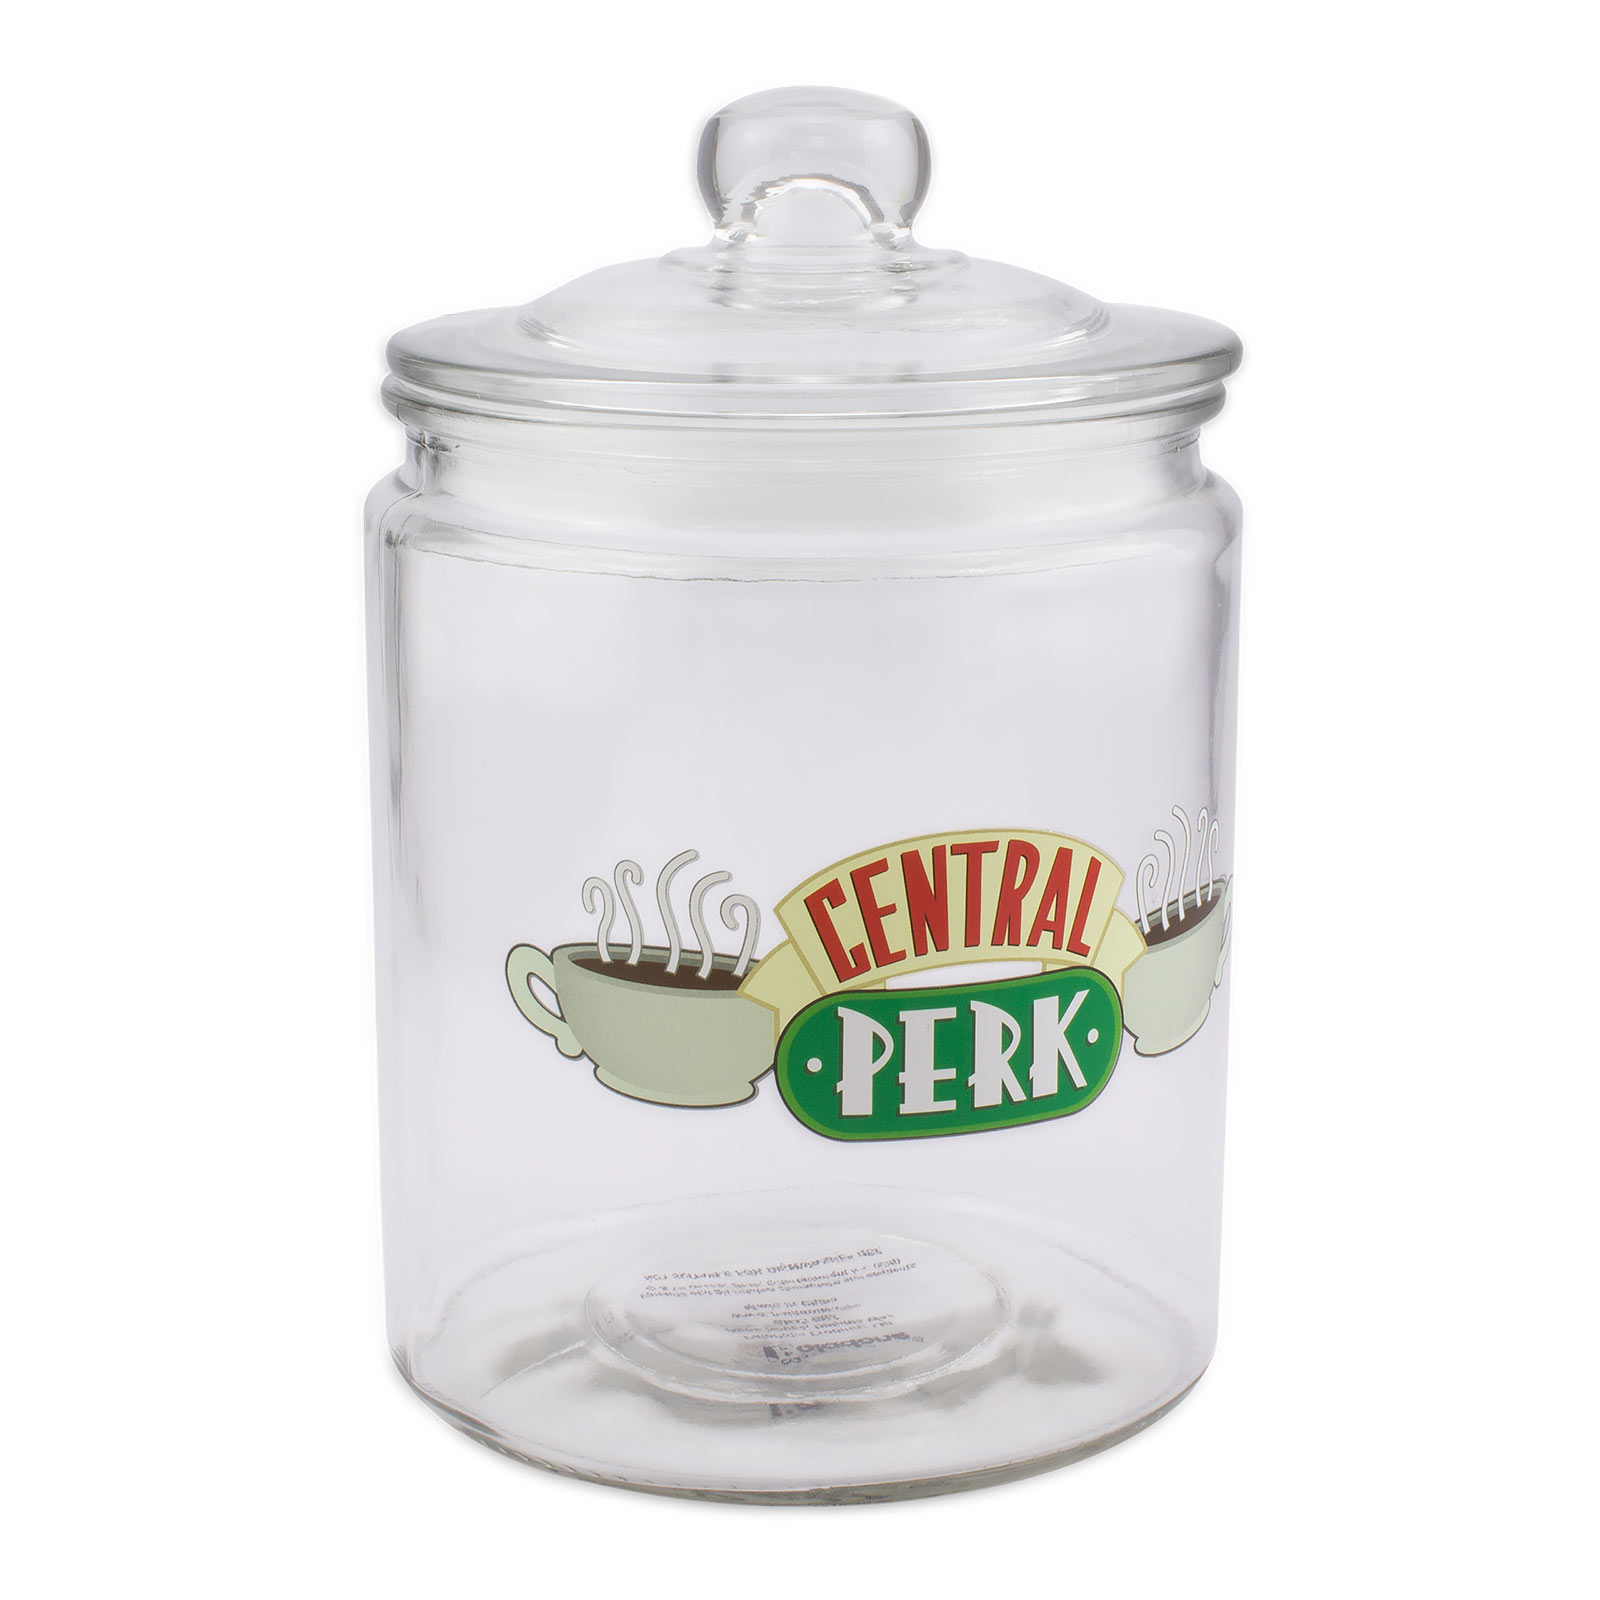 Friends - Central Perk cookie jar with lid glass